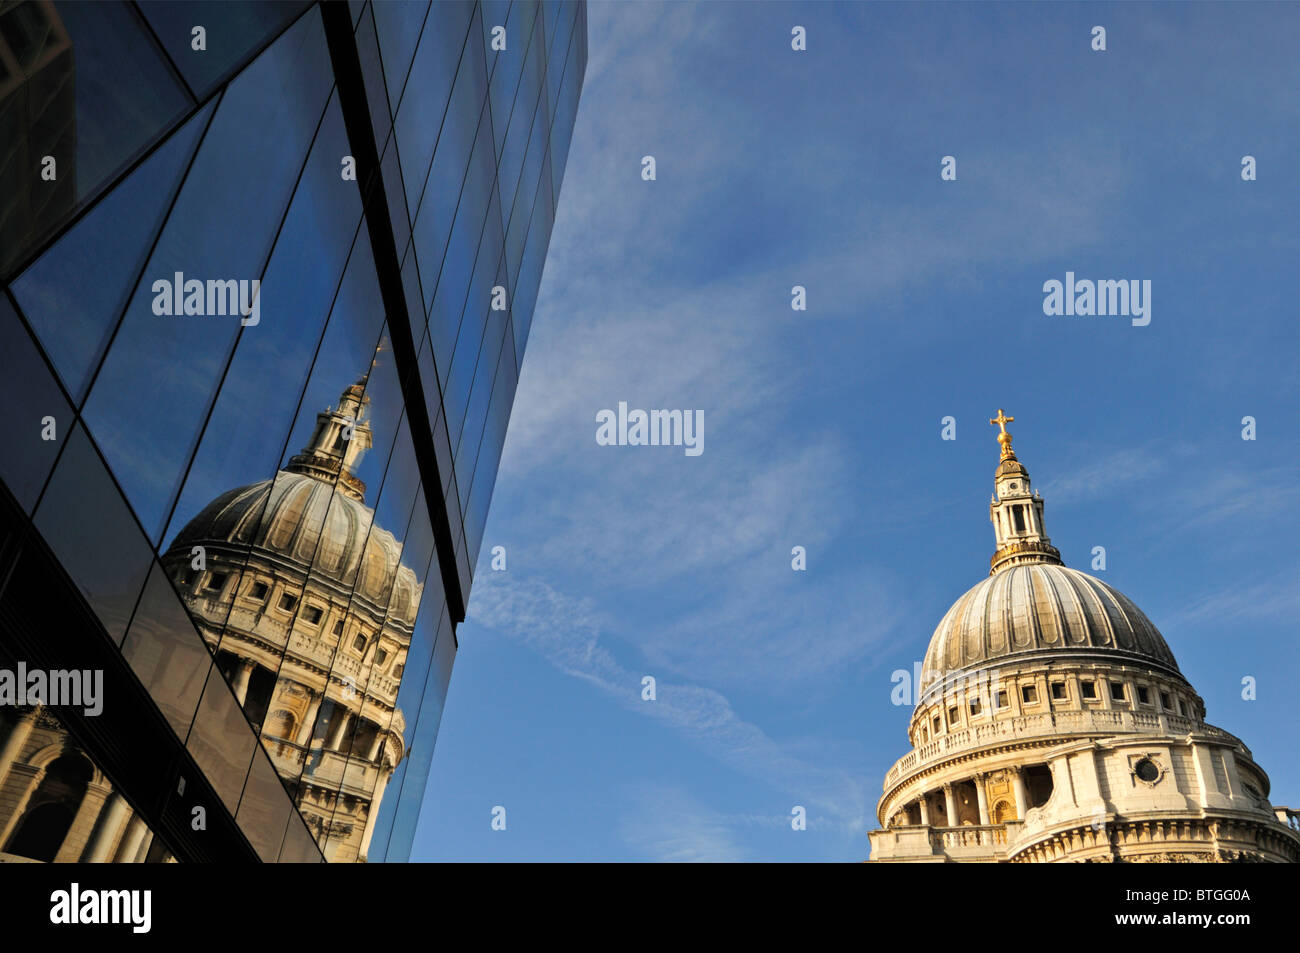 St Paul's cathedral reflected in One New Change shopping destination, London United Kingdom Stock Photo